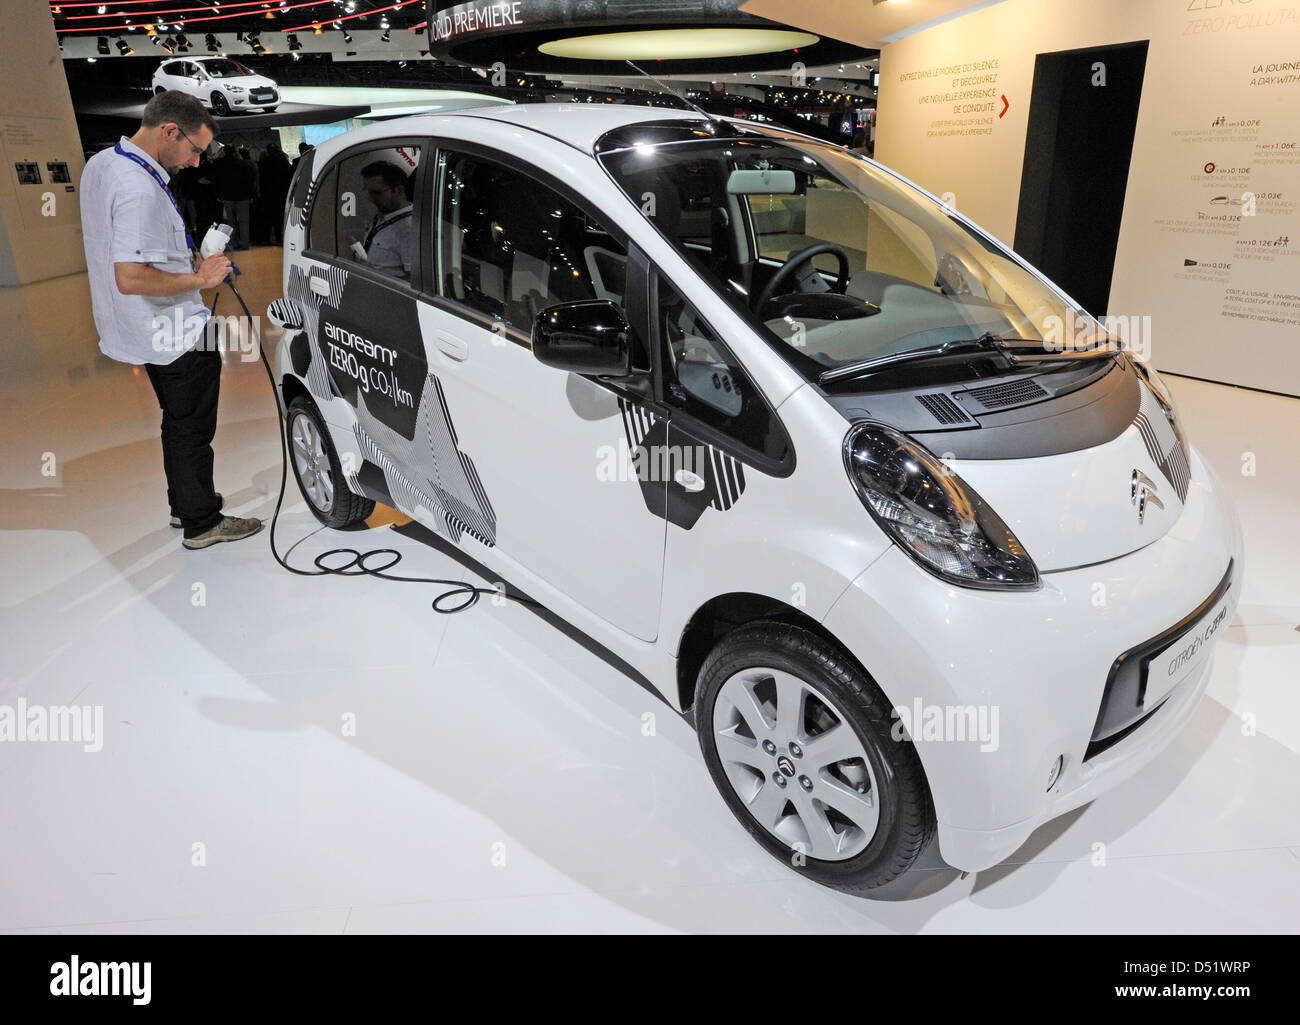 A Citroen C-Zero is presented at the 2010 Paris Motor Show in Paris, France, 01 October 2010. Some 300 exhibitors from 20 countries showcase their latest products and developments at the 2010 Paris Motor Show, that is one of the world's biggest motor shows. Photo: ULI DECK Stock Photo